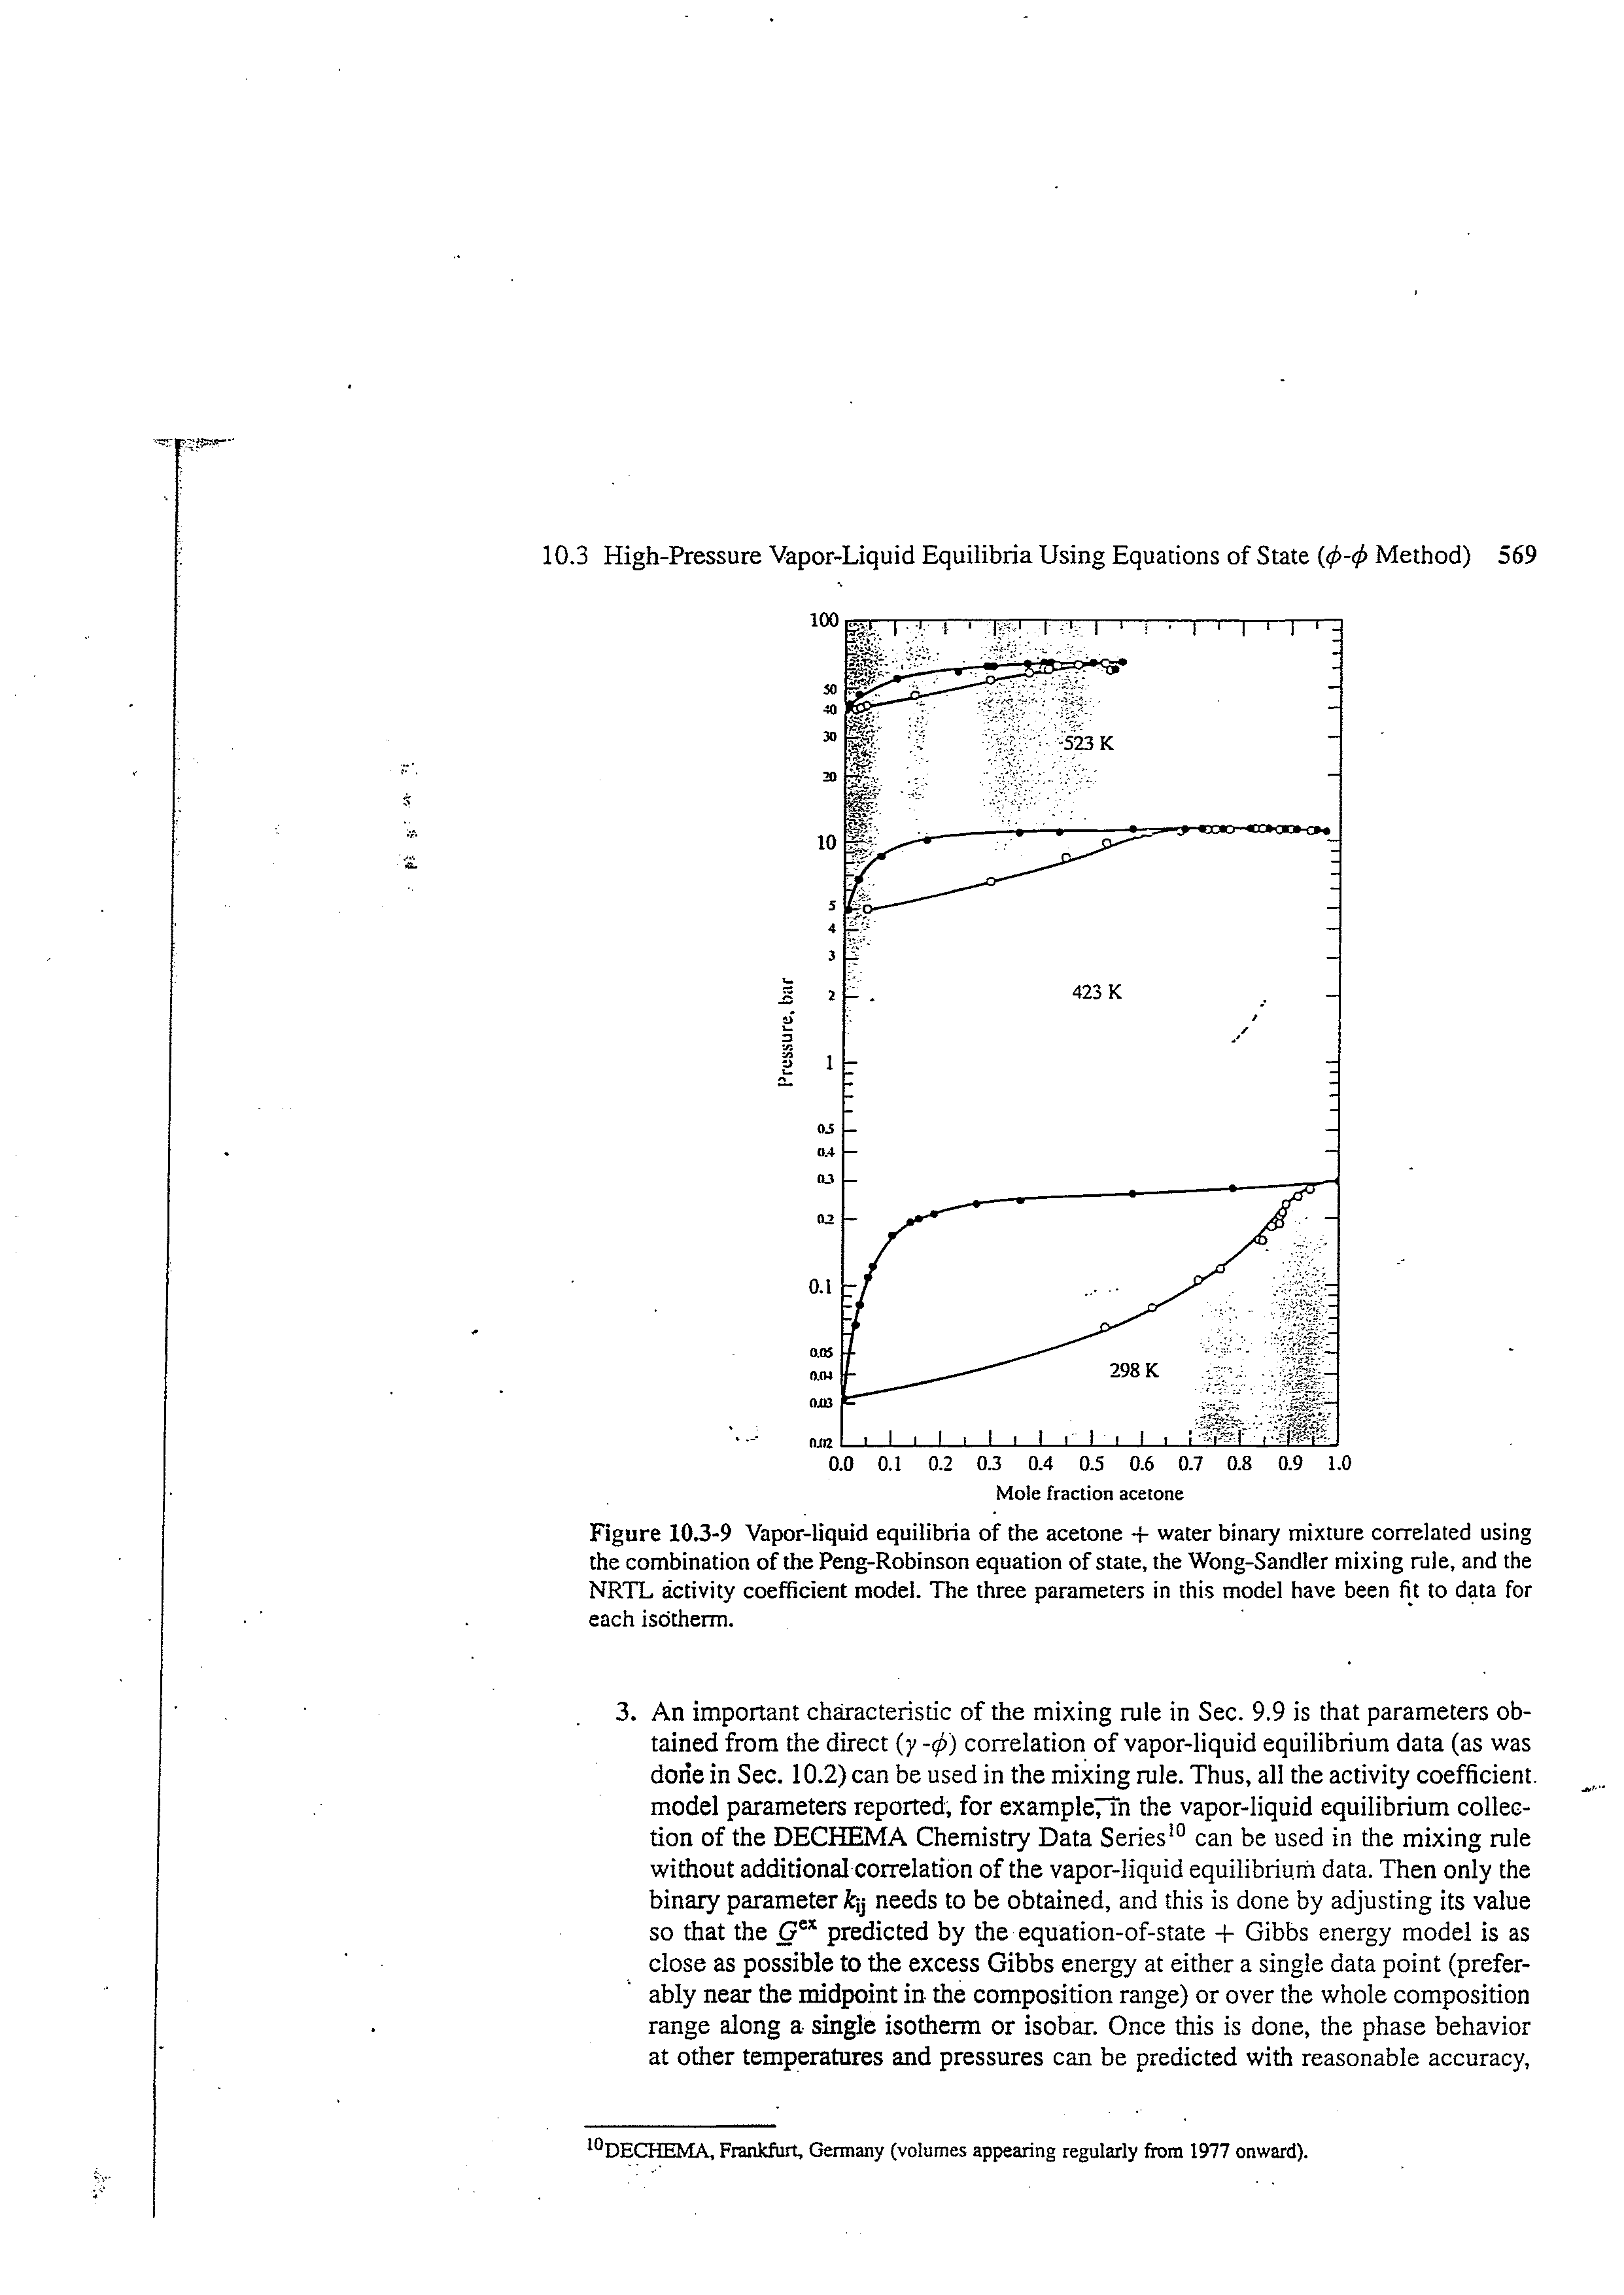 Figure 10.3-9 Vapor-liquid equilibria of the acetone -f water binary mixture correlated using the combination of the Peng-Robinson equation of state, the Wong-Sandler mixing rule, and the NRTL activity coefficient model. The three parameters in this model have been fit to data for each isotherm.